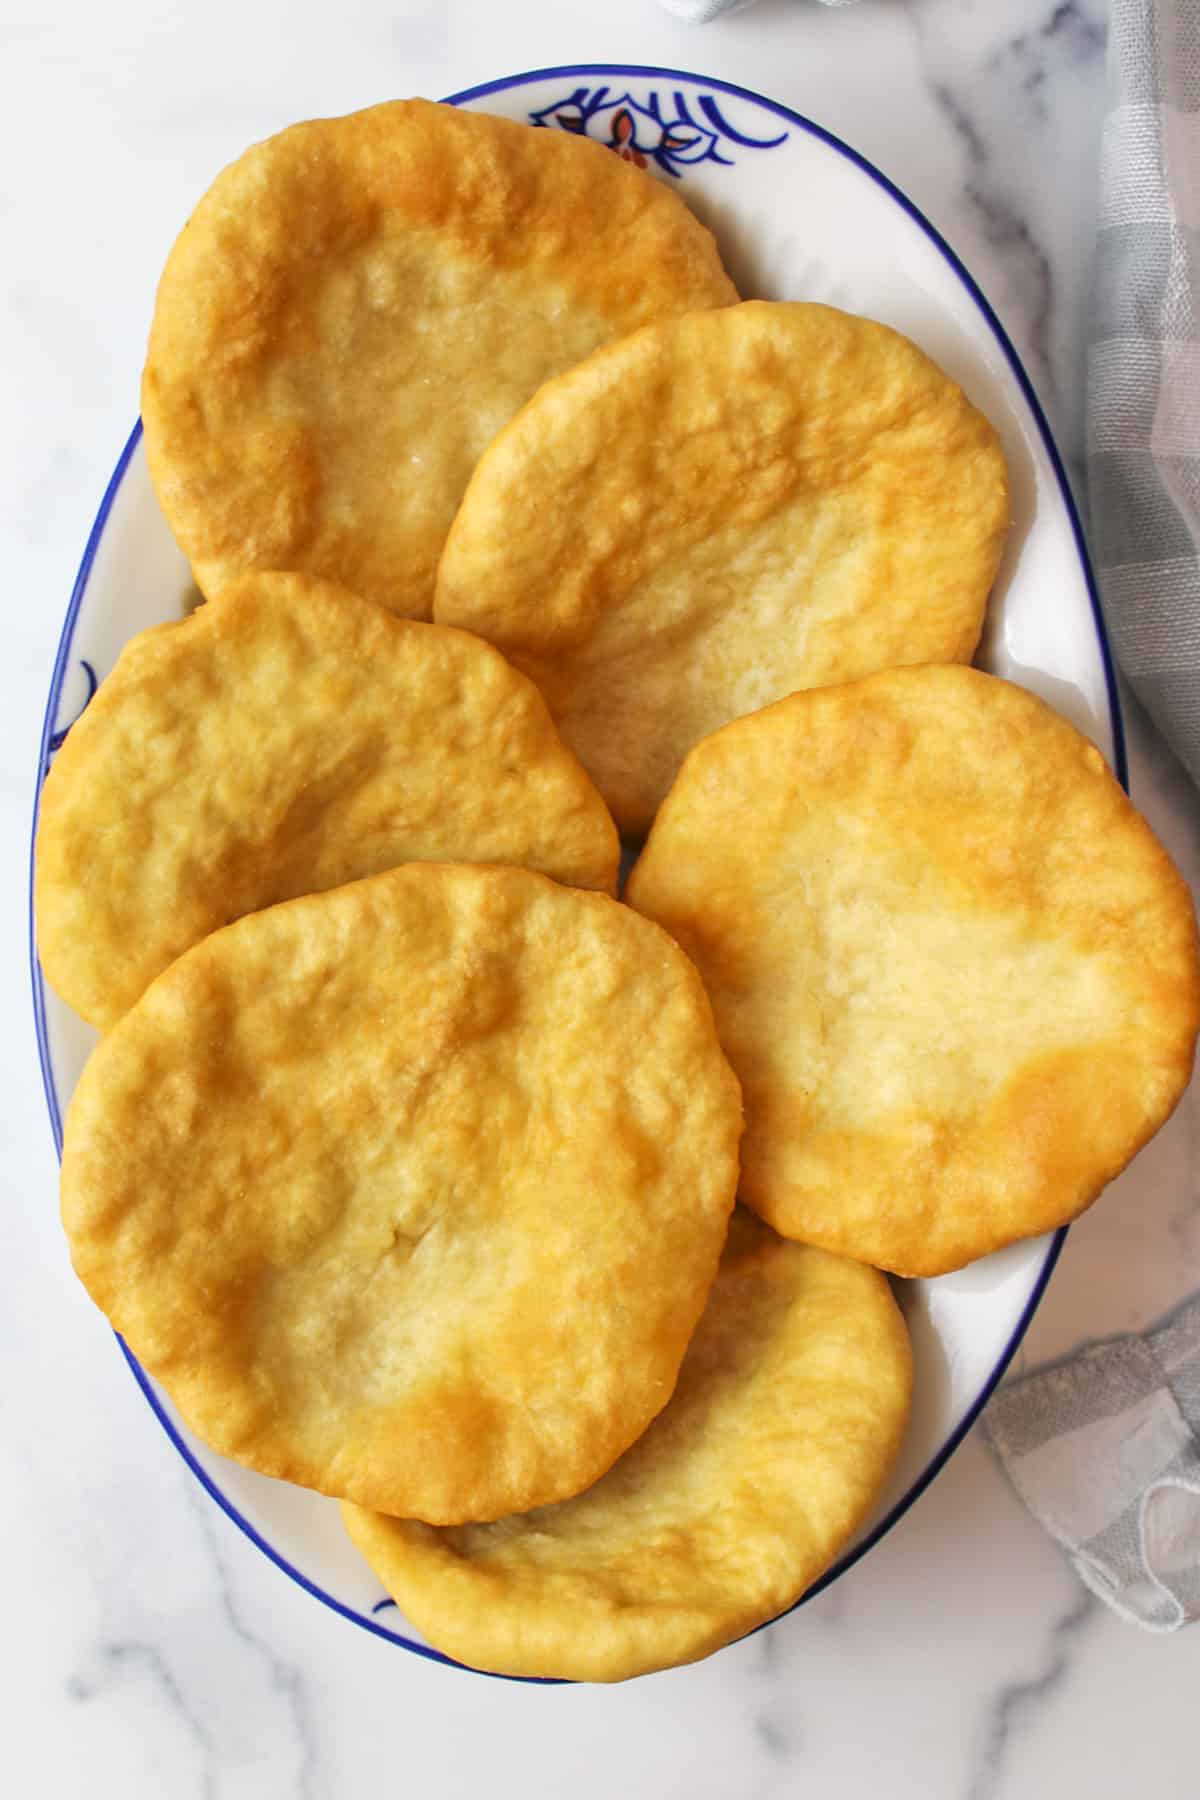 a dish filled with golden cooked fry bread